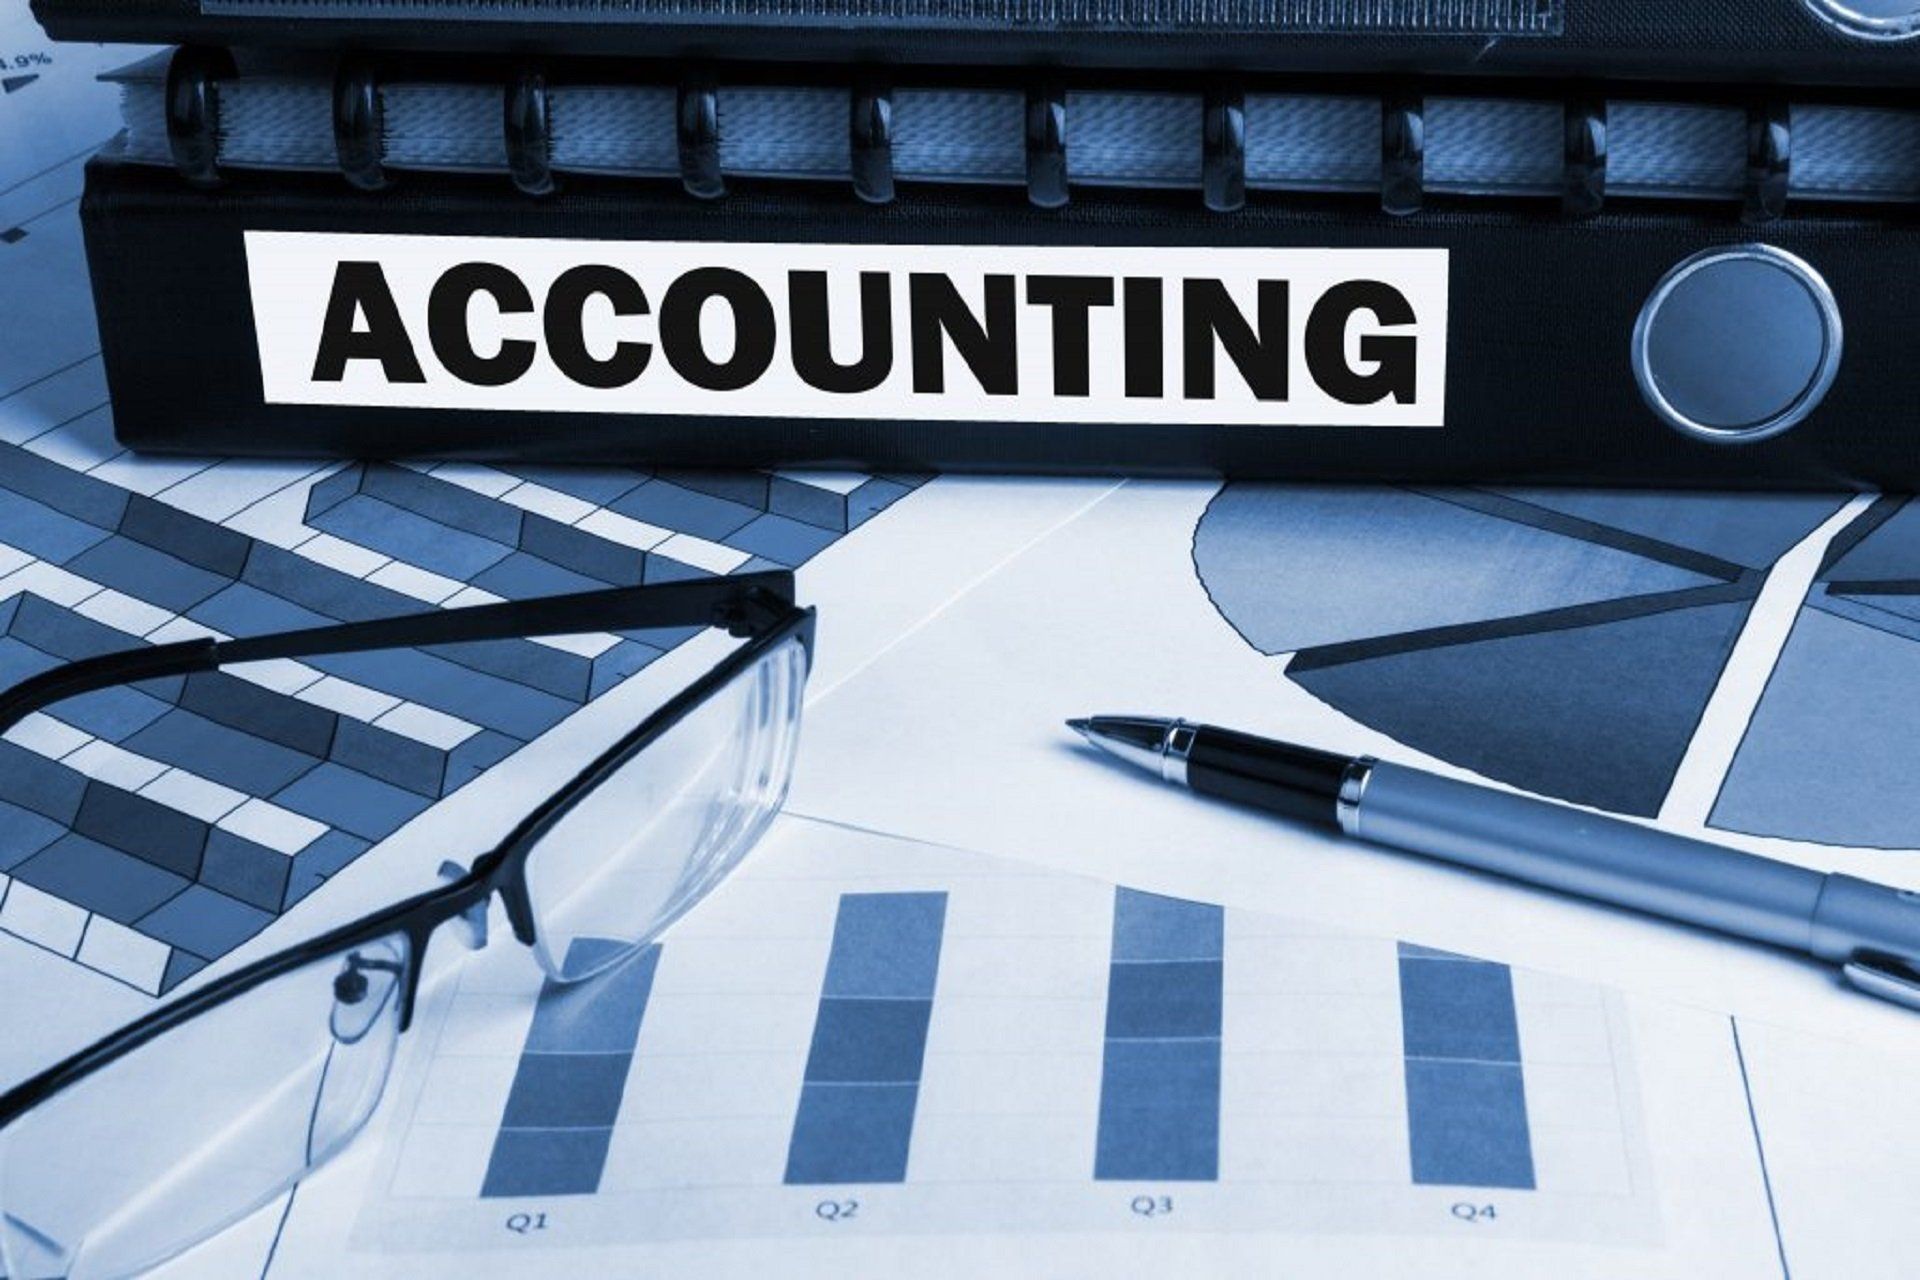 IRS issues guidance on small business accounting